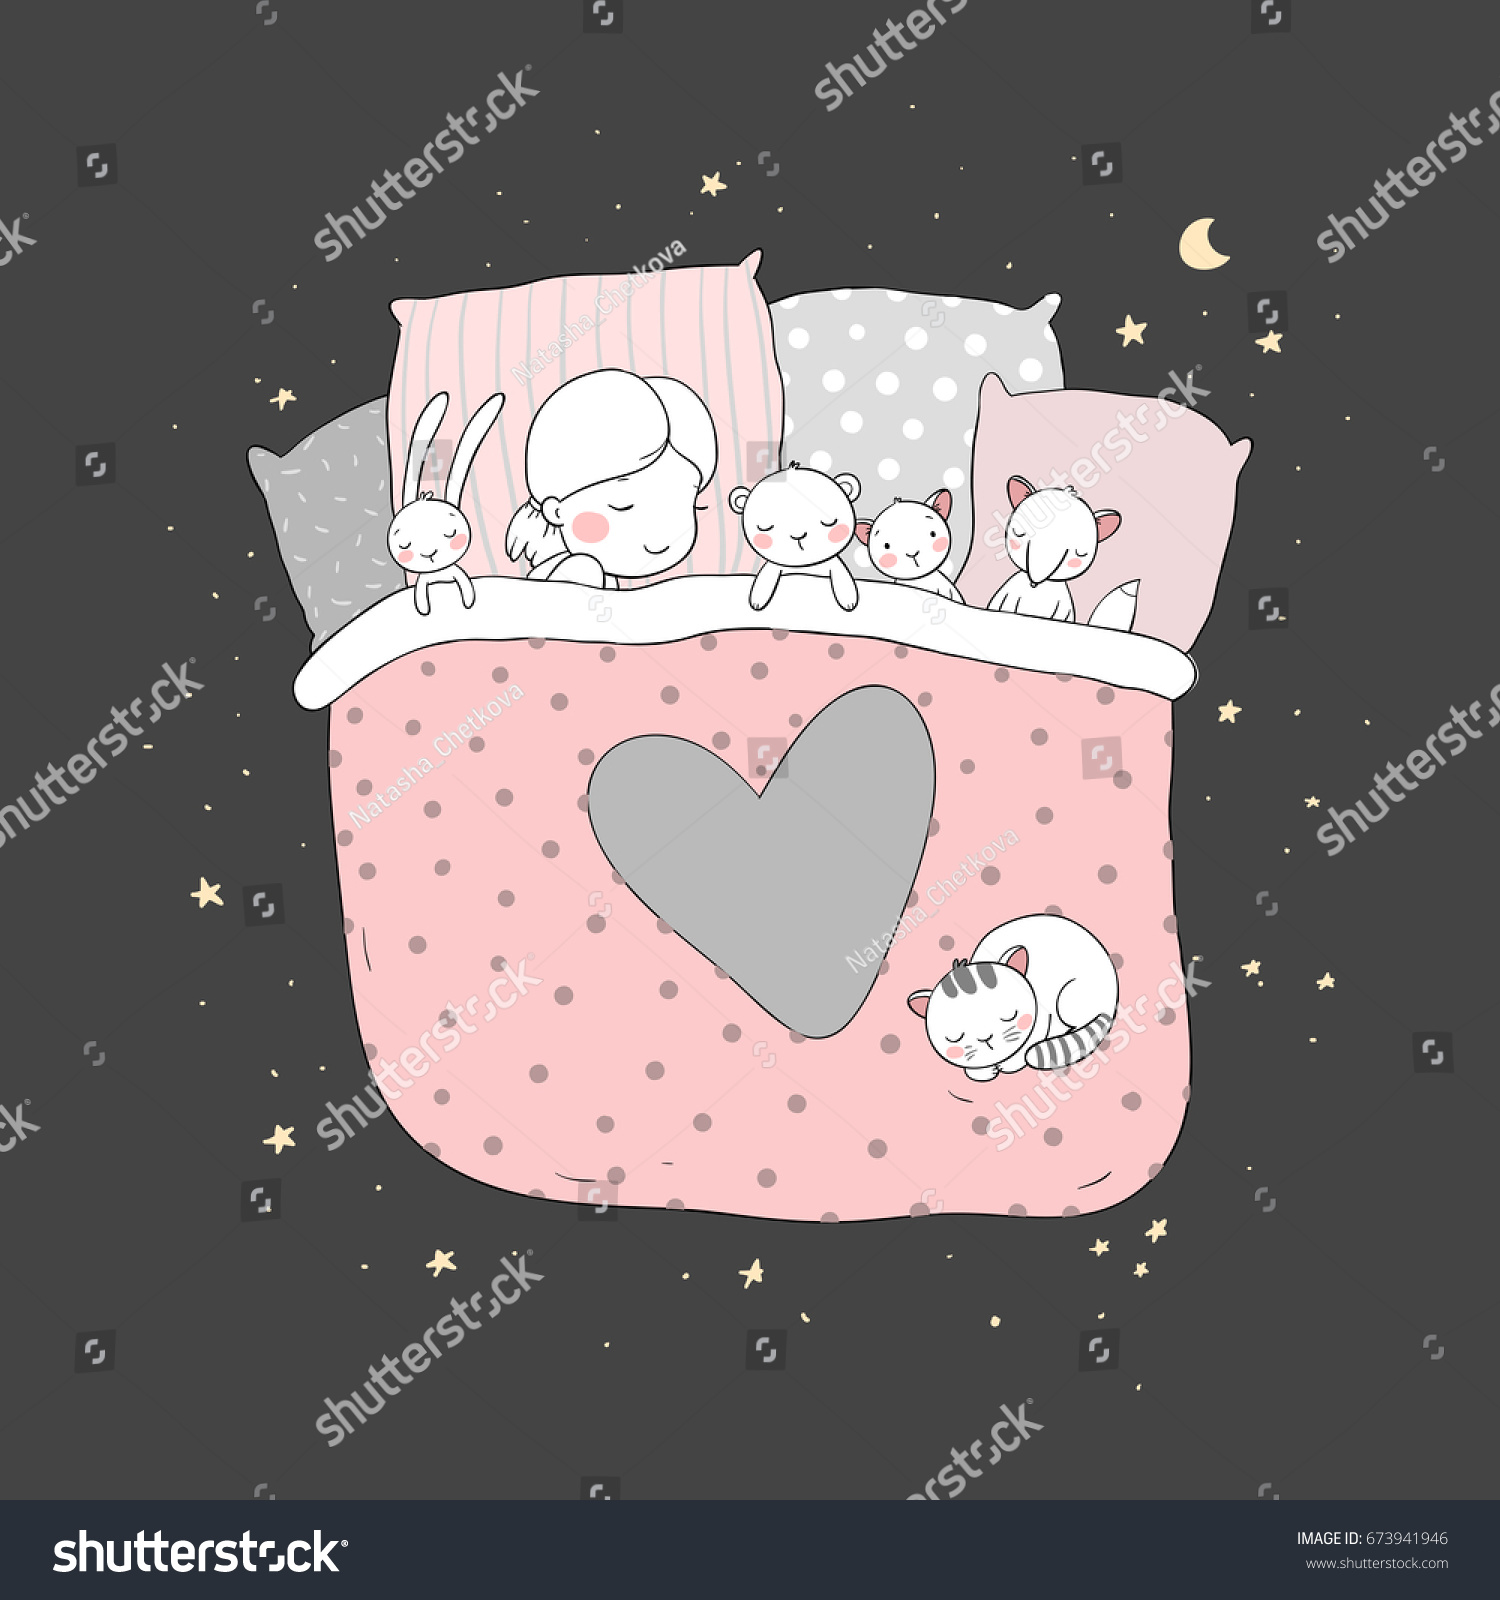 Child Sleeping Her Toys Sweet Dreams Stock Vector Royalty Free